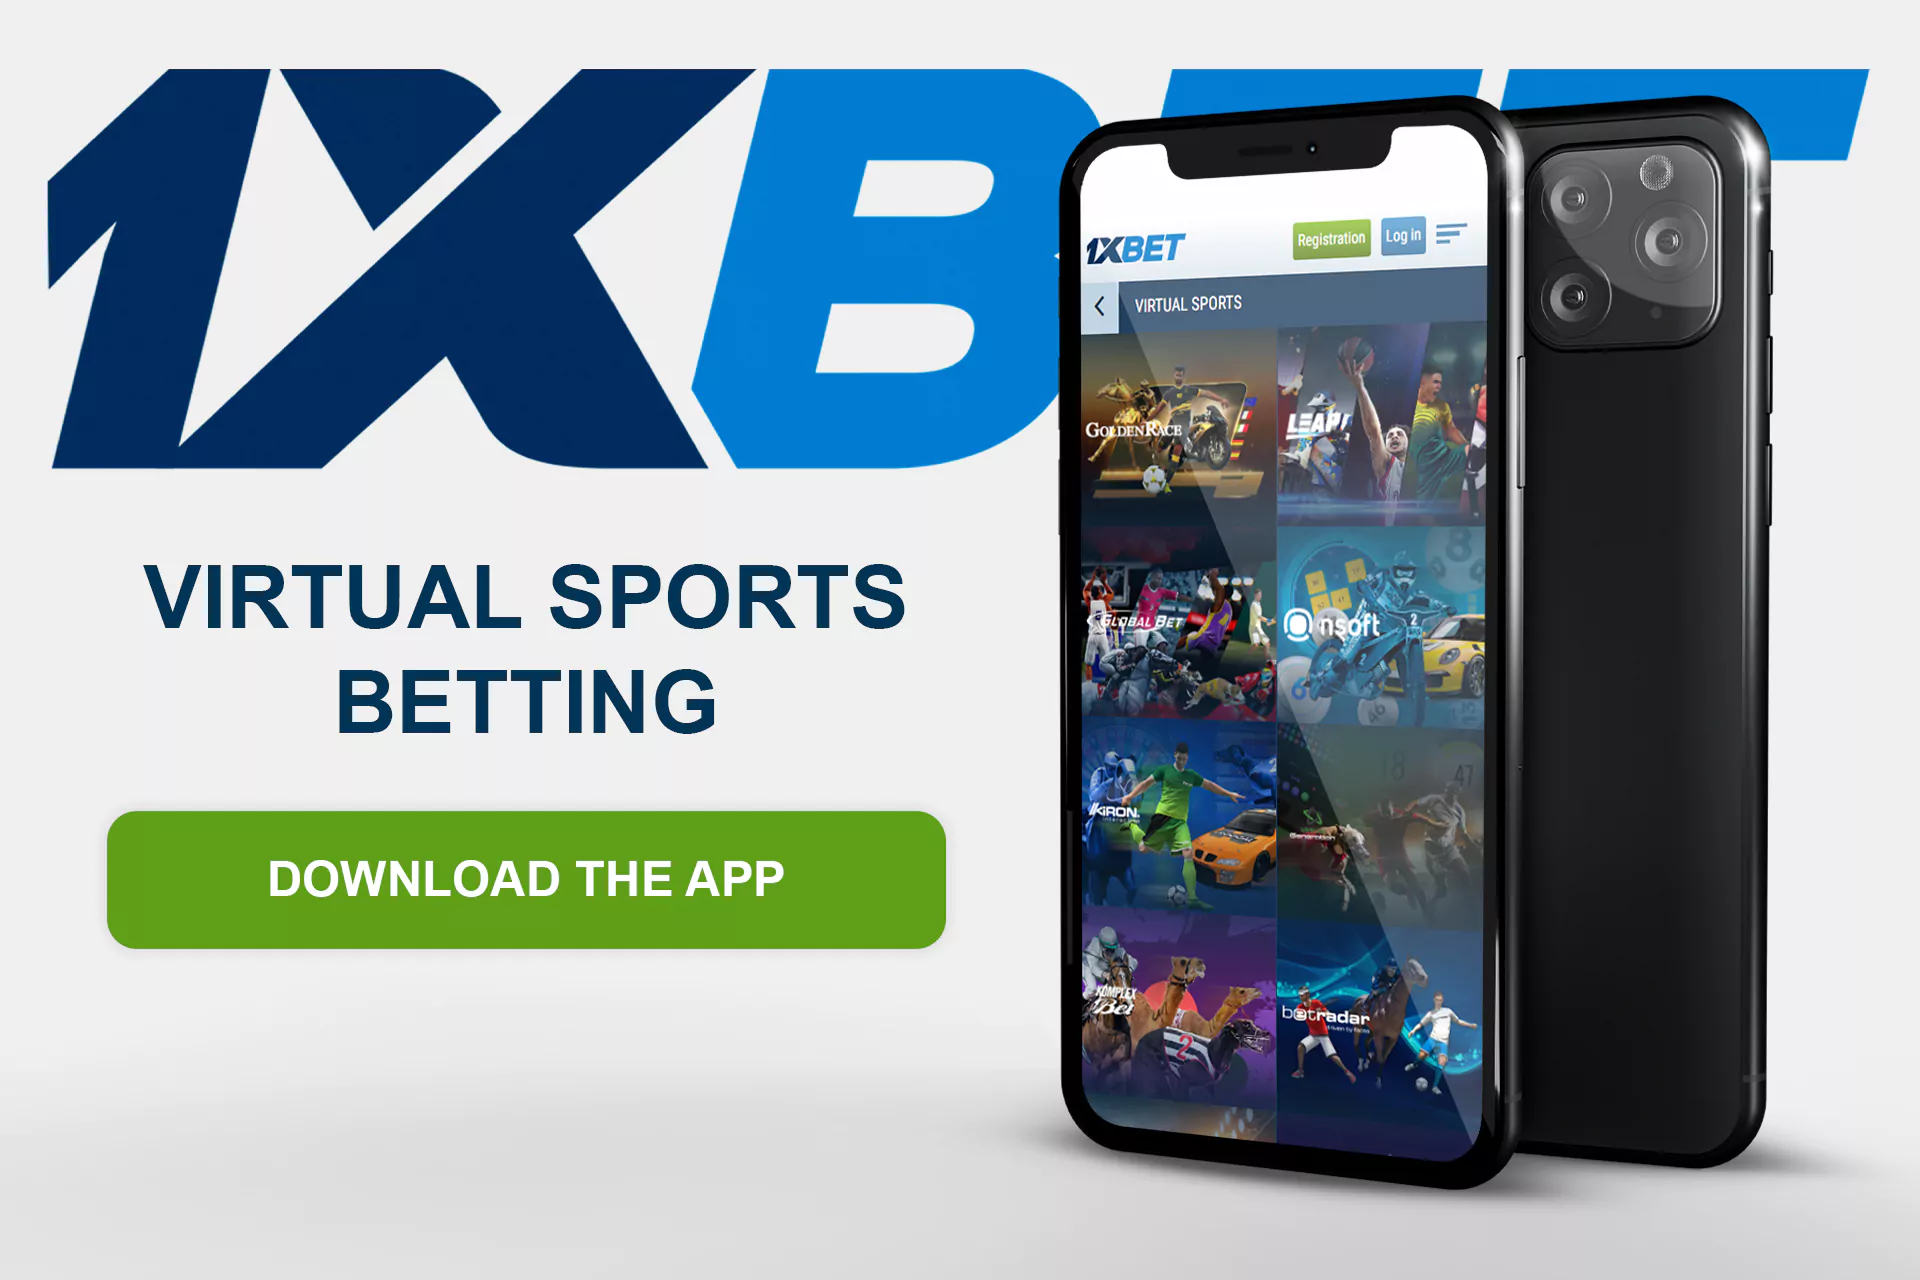 In the 1xBet app you can bet on virtual sports.